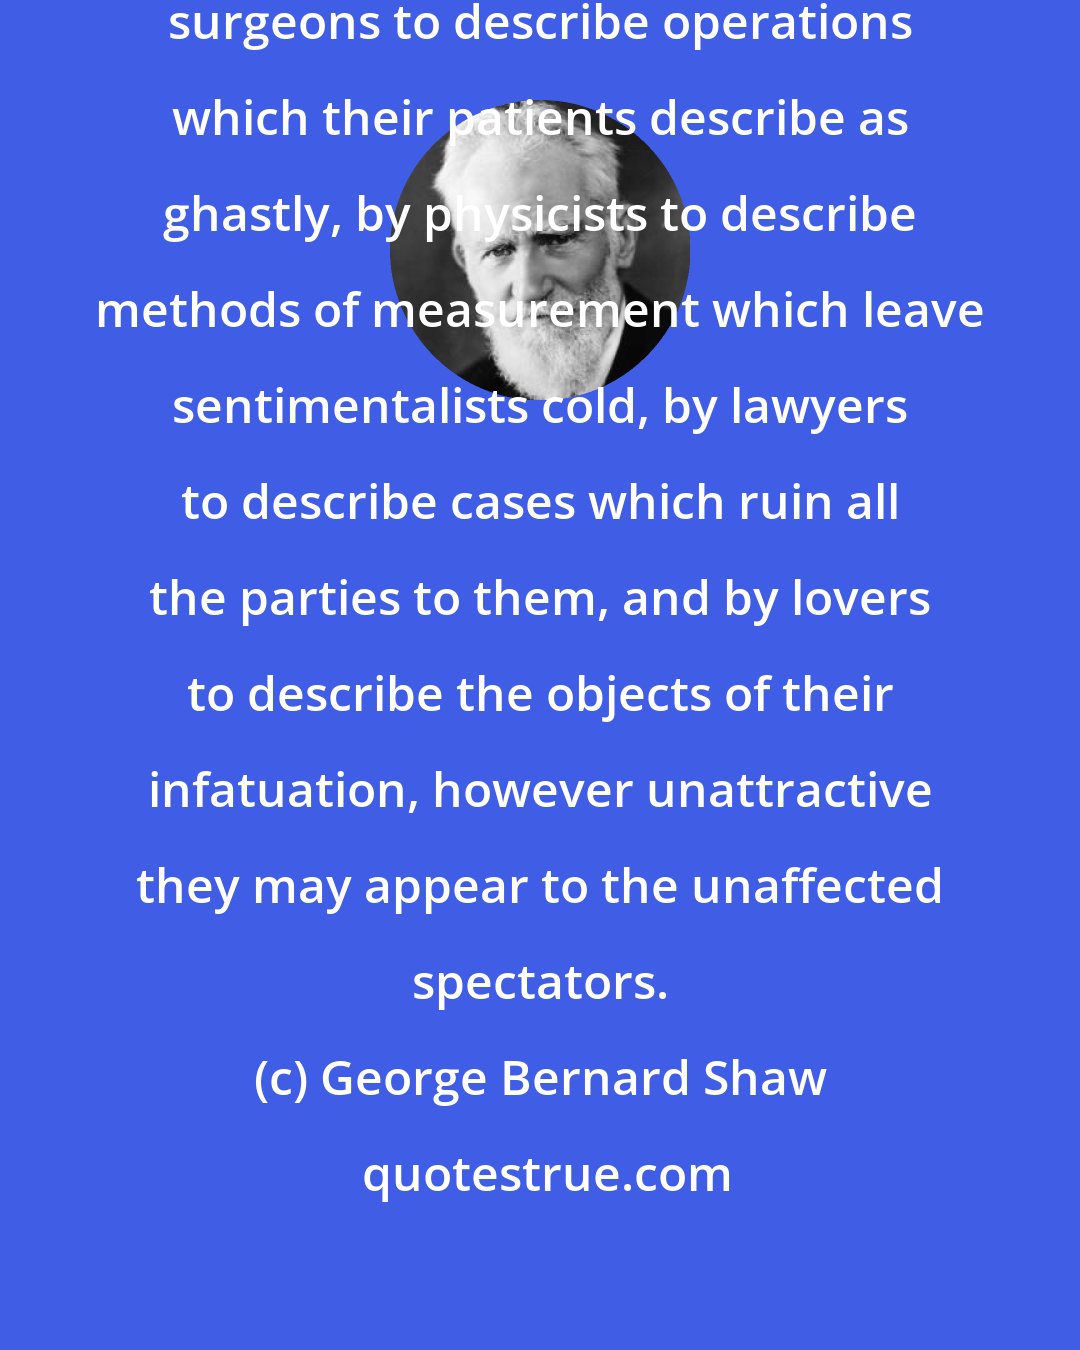 George Bernard Shaw: The epithet beautiful is used by surgeons to describe operations which their patients describe as ghastly, by physicists to describe methods of measurement which leave sentimentalists cold, by lawyers to describe cases which ruin all the parties to them, and by lovers to describe the objects of their infatuation, however unattractive they may appear to the unaffected spectators.